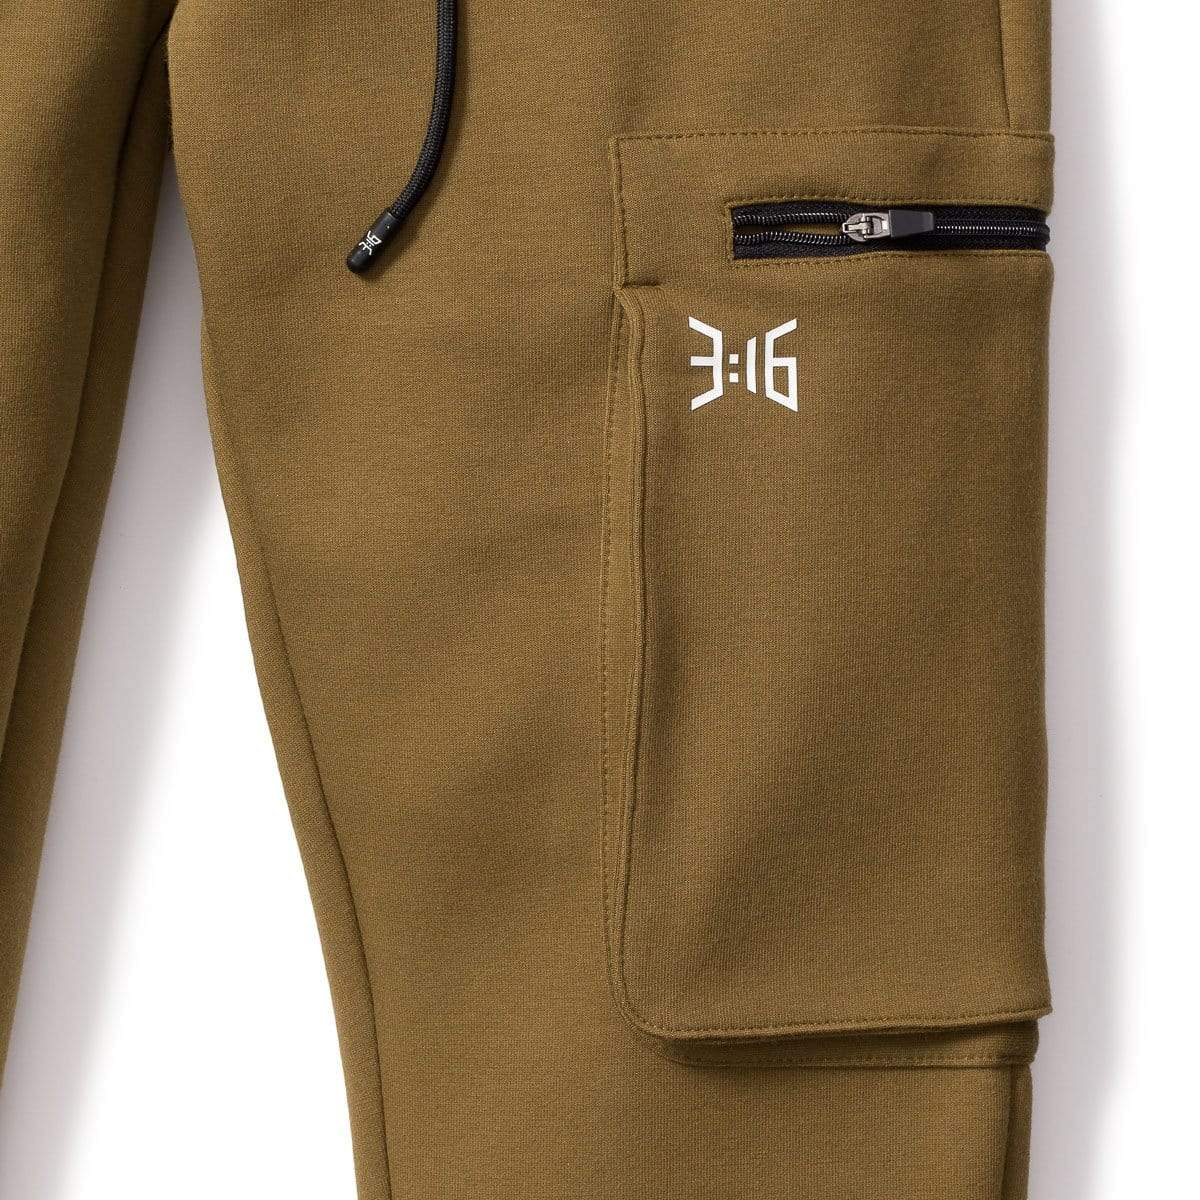 3:16 Collection Joggers 3:16 Cargo Joggers - Army Green